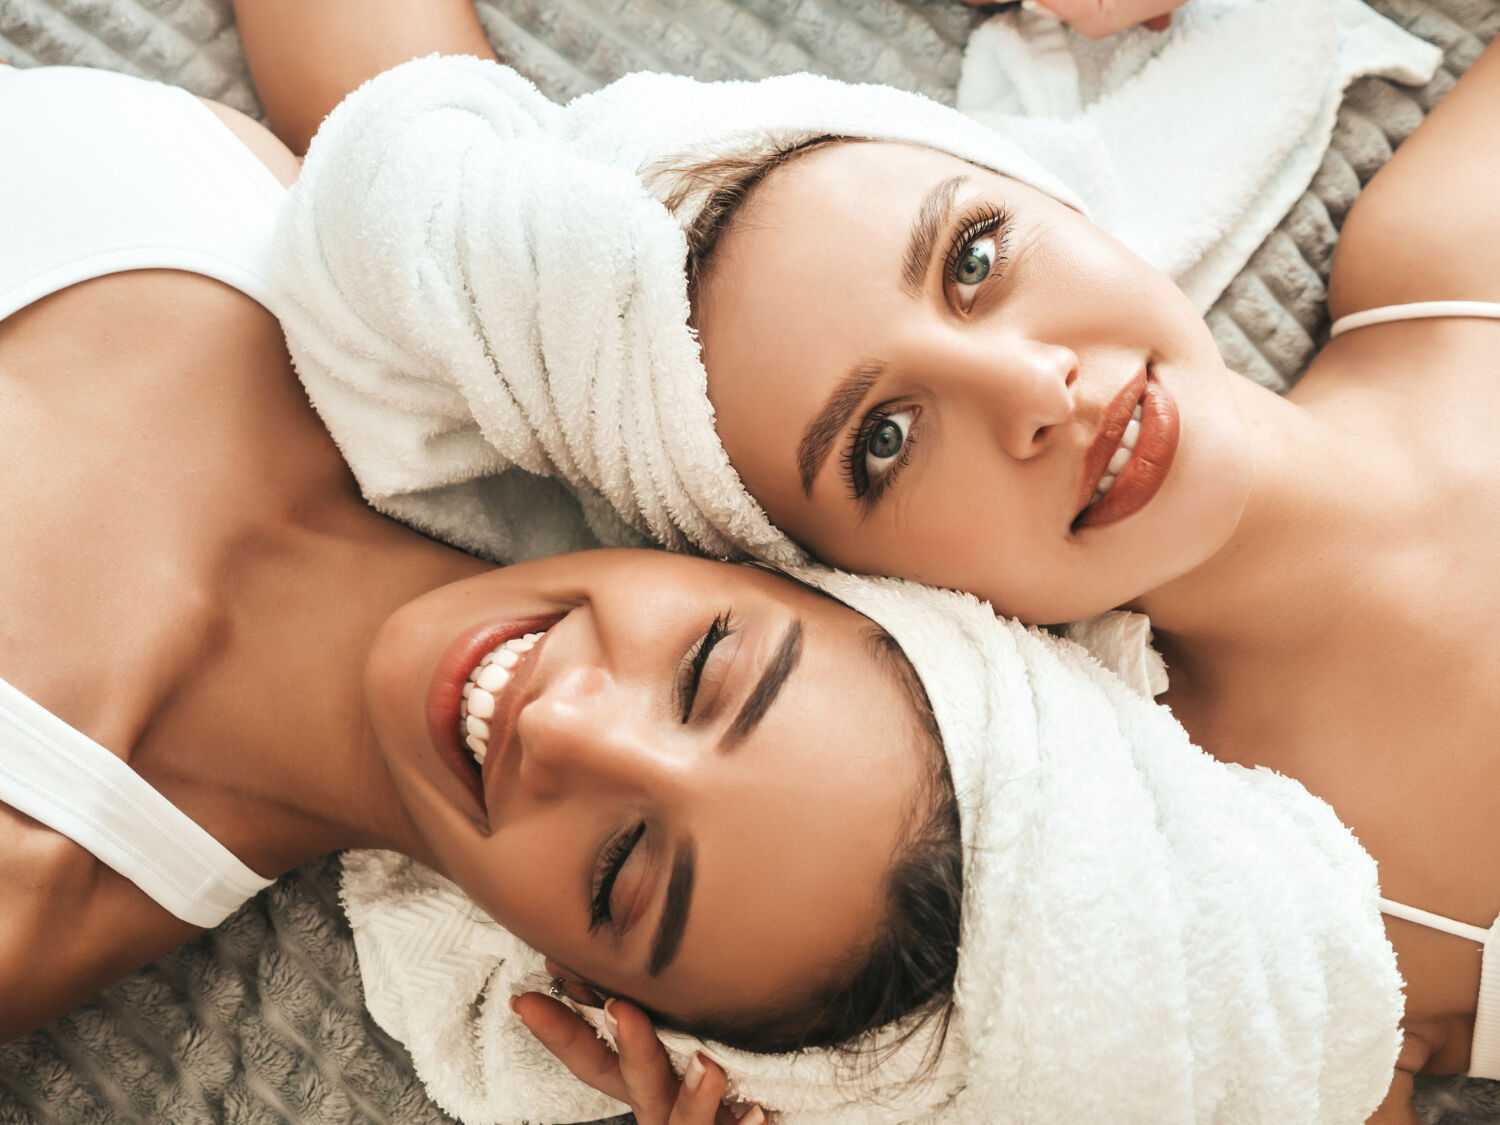 two-young-beautiful-smiling-women-white-bathrobes-towels-head